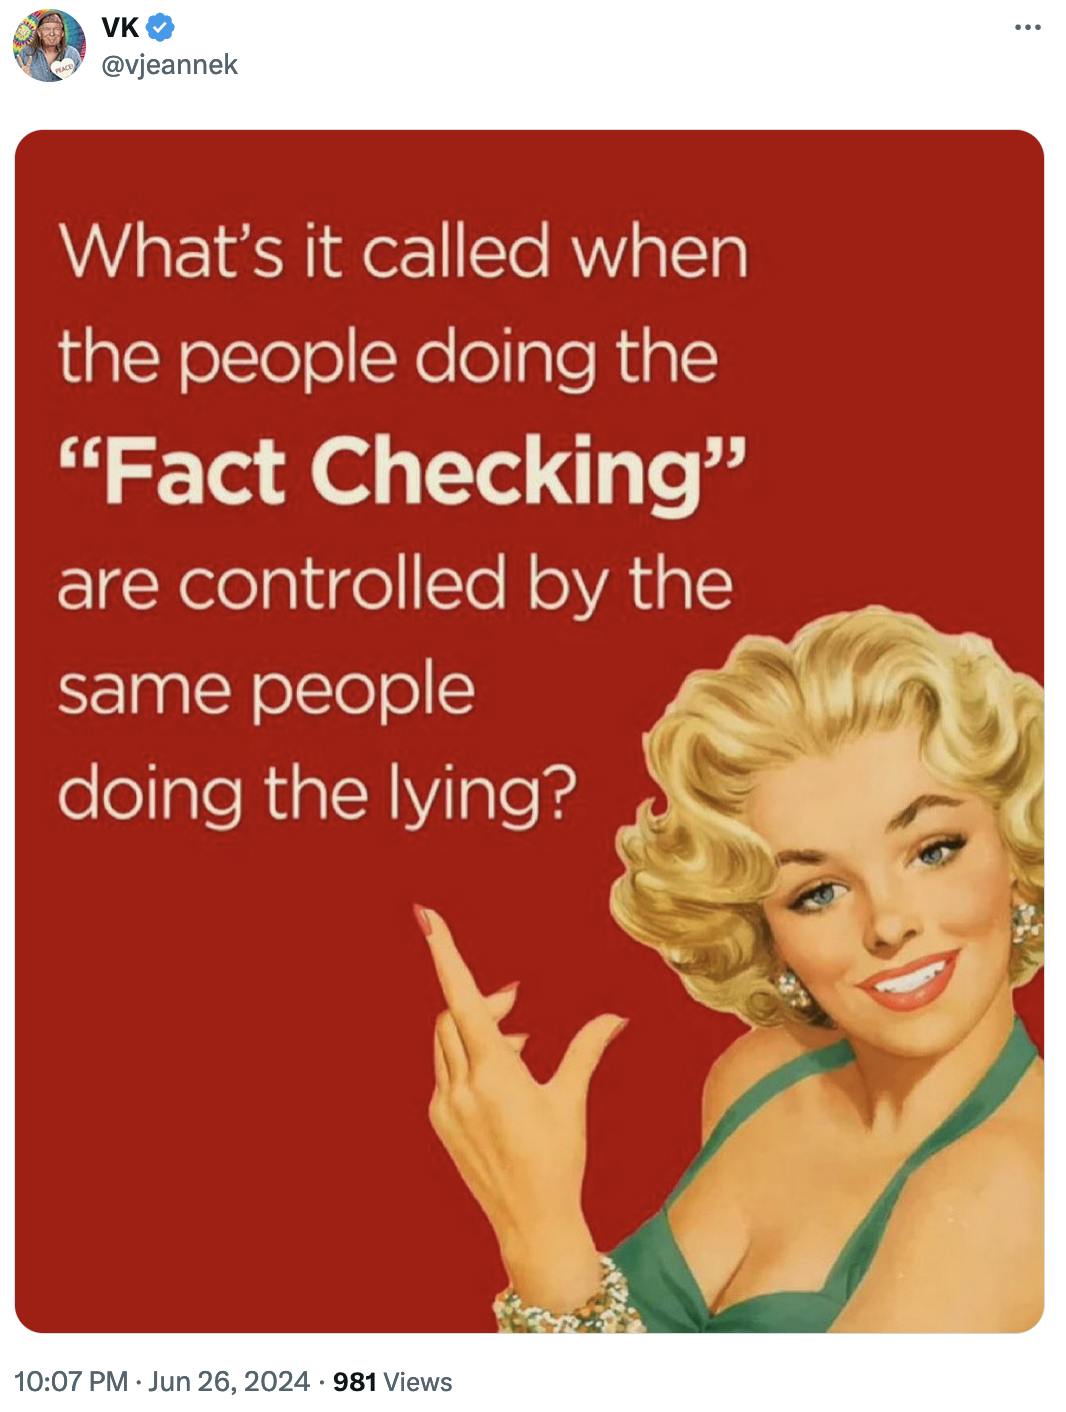 Twitter Screenshot: @vjeannek Meme with Marilyn Monroe asking: What's it called when the people doing the "Fact Checking" are controlled by the same people doing the lying?